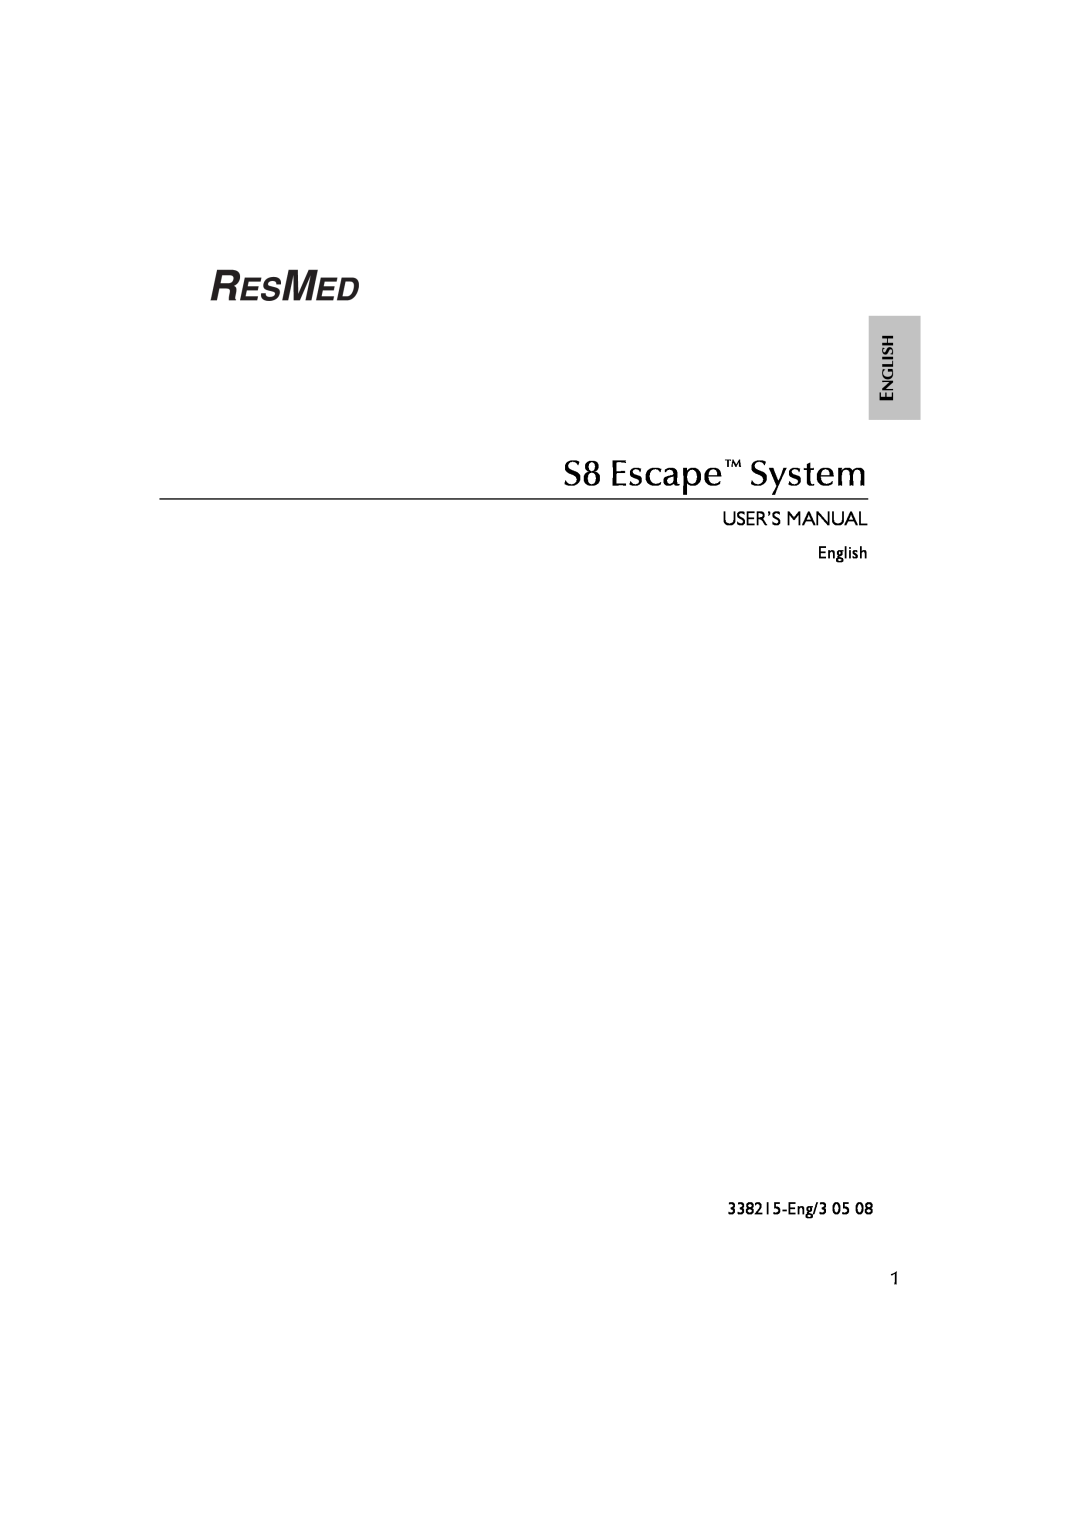 ResMed s8, S8 ESCAPE SYSTEM user manual S8 Escape System, English 